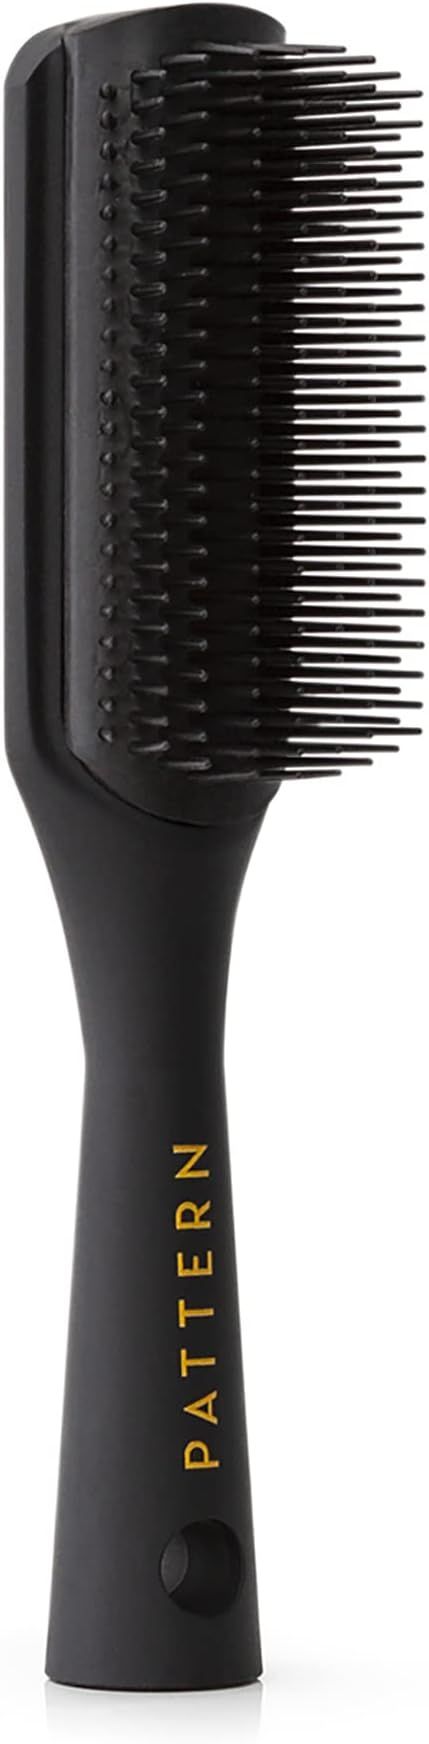 PATTERN Beauty Shower Brush for Curlies, Coilies and Tight Textures | Amazon (US)